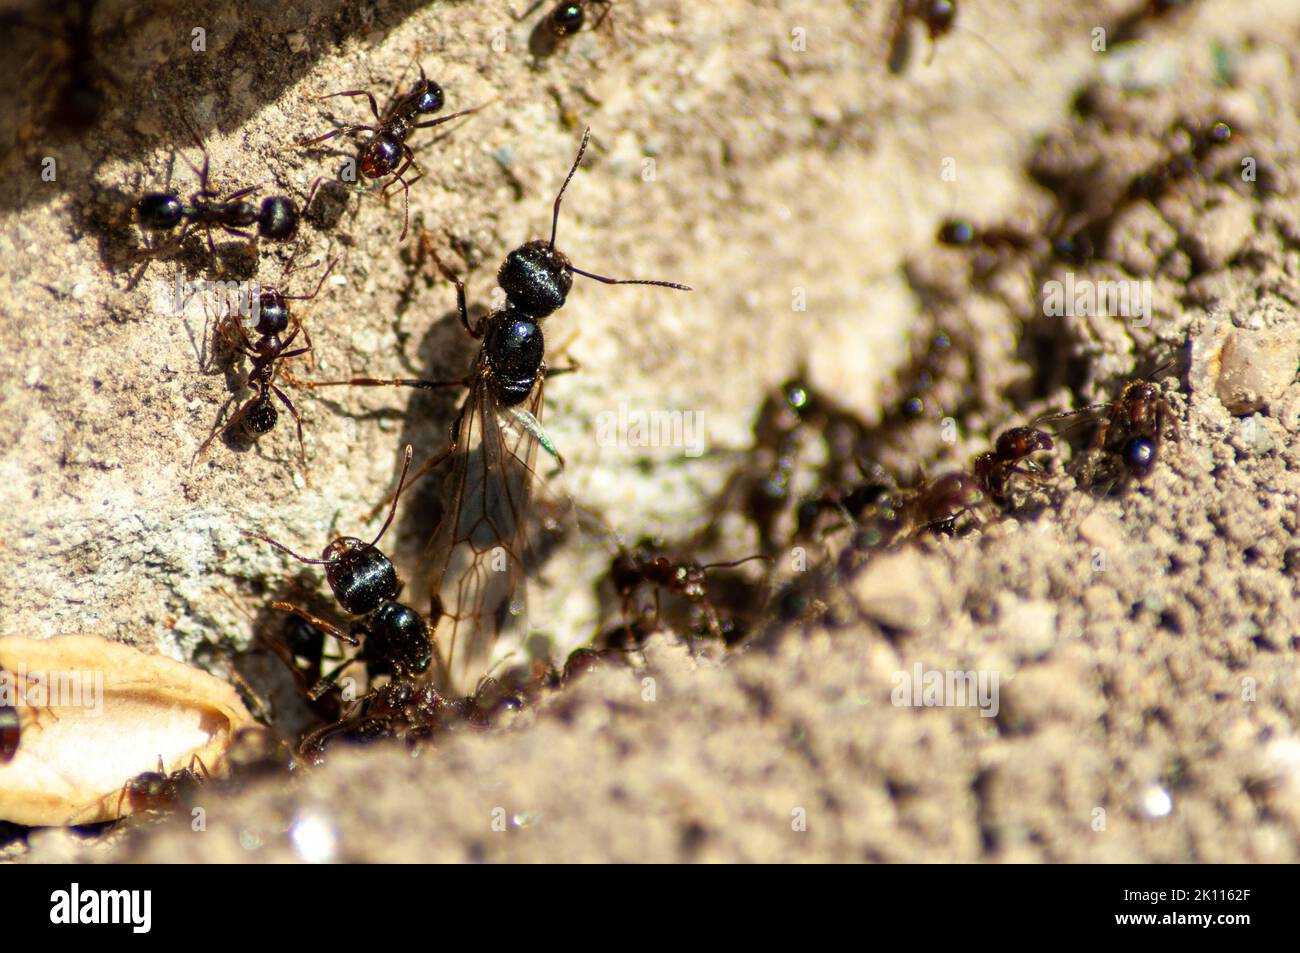 Queen ant and worker ants. Stock Photo